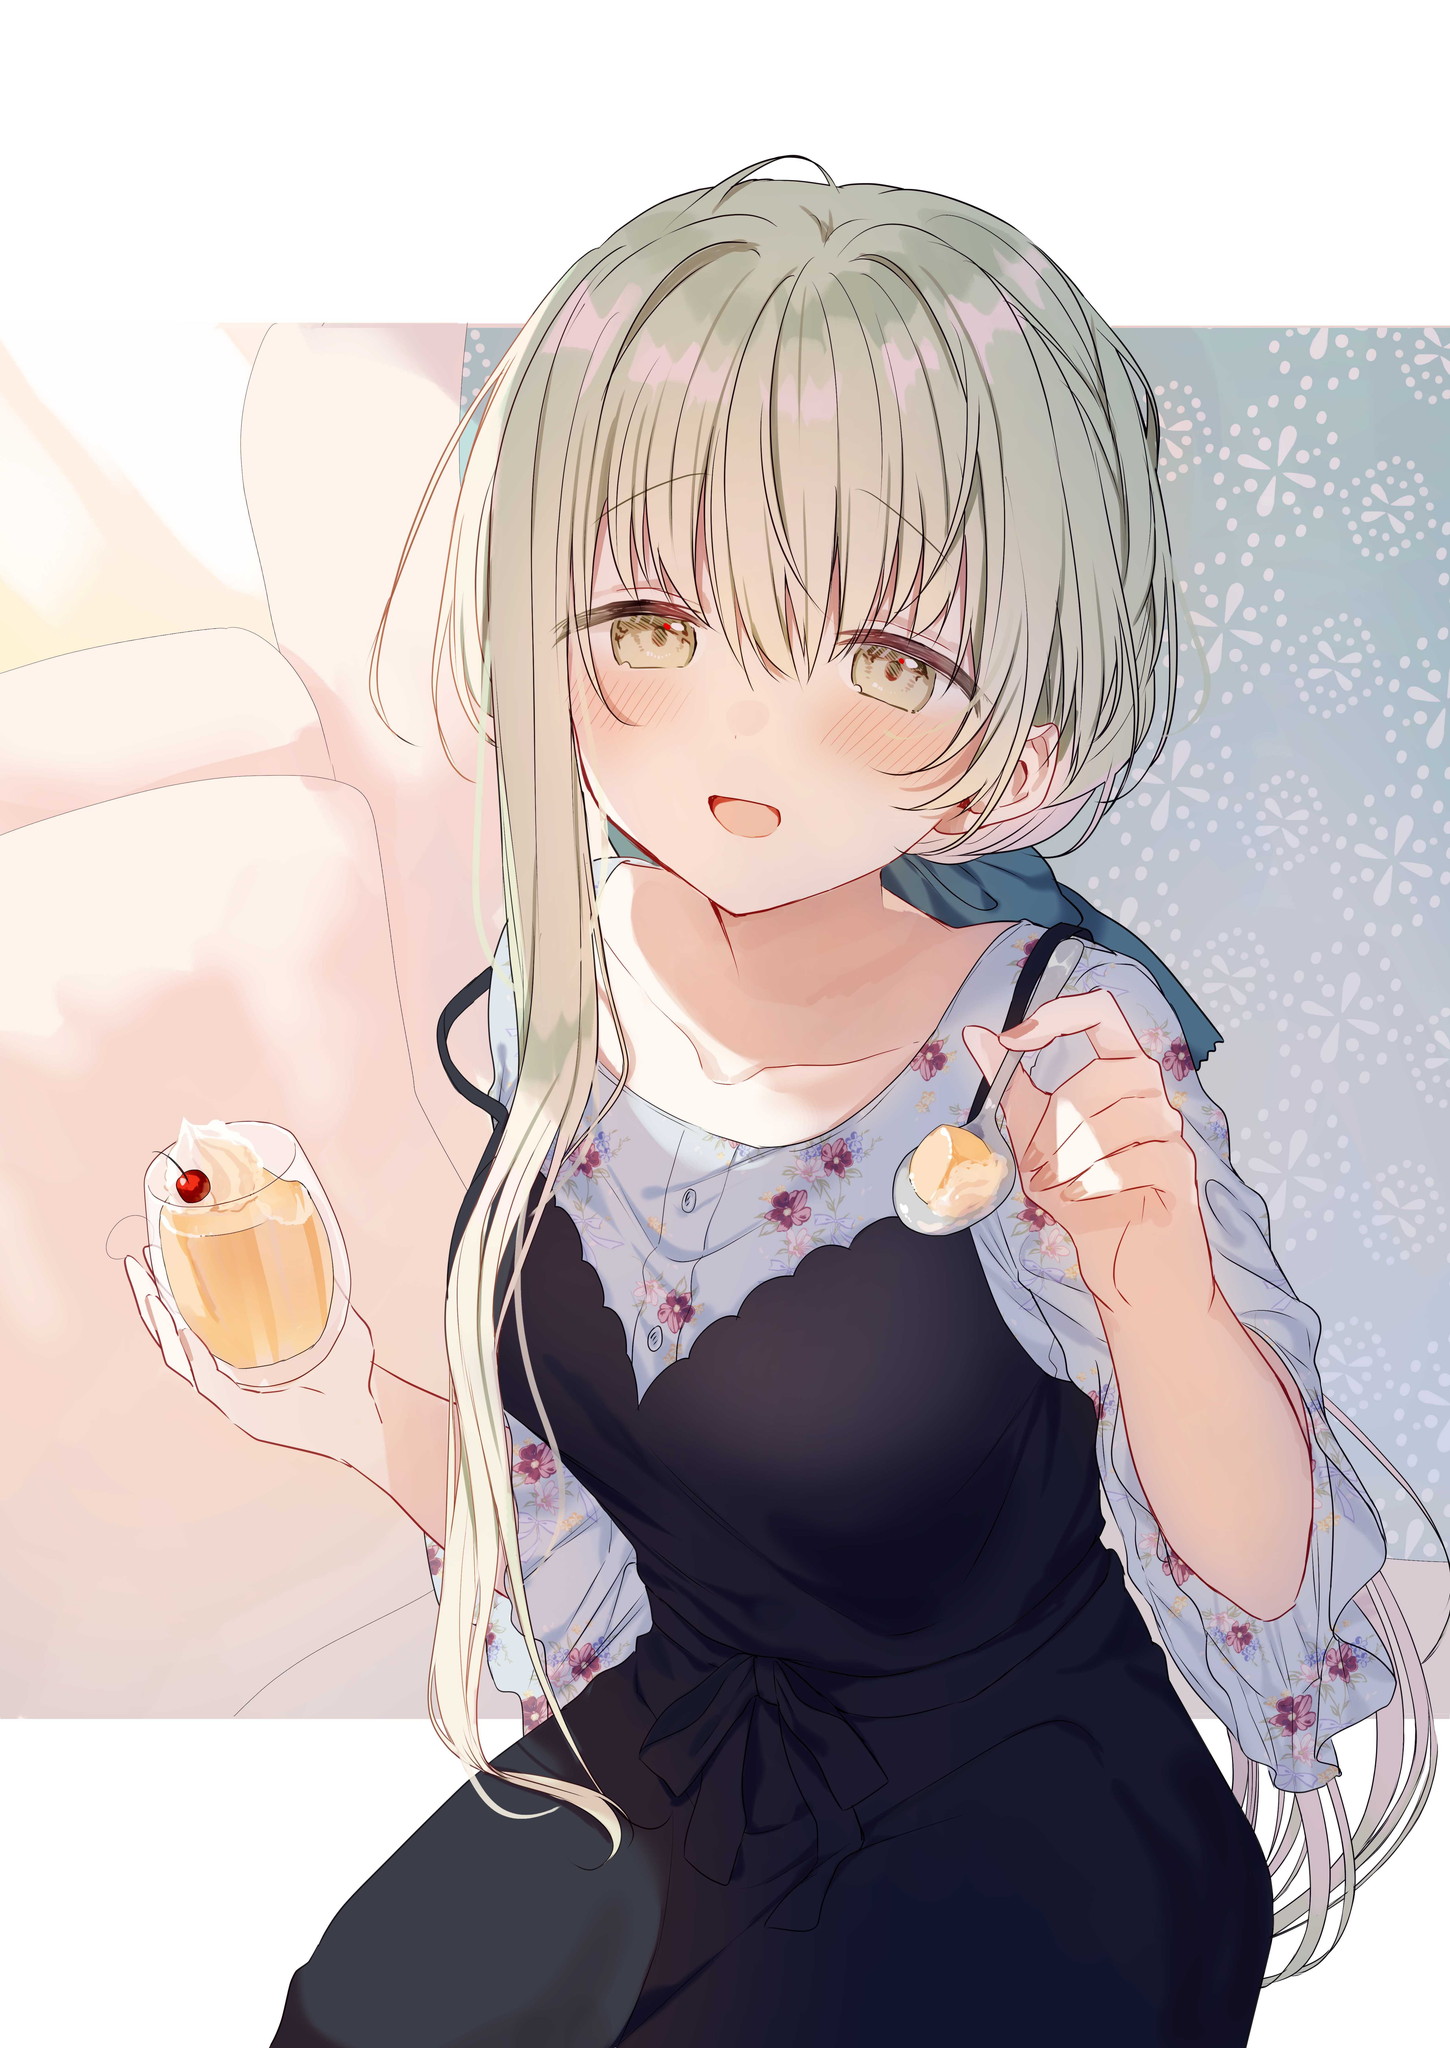 Anime 1450x2048 anime anime girls TEIGI_3 green hair original characters spoon longuette glass hair between eyes food collarbone long hair open mouth blushing looking at viewer floral bright portrait display cherries whipped cream